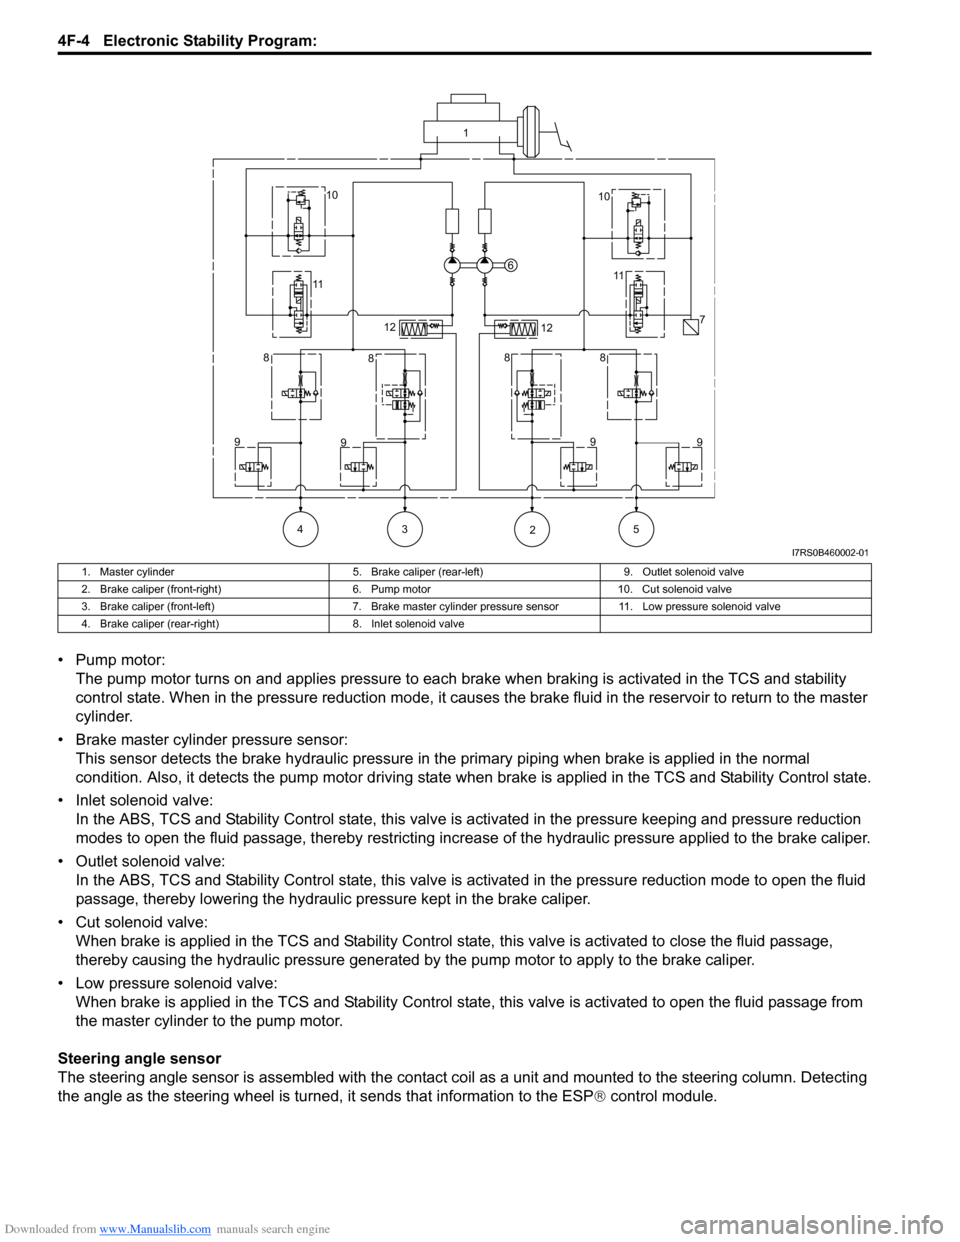 SUZUKI SWIFT 2005 2.G Service Workshop Manual Downloaded from www.Manualslib.com manuals search engine 4F-4 Electronic Stability Program: 
• Pump motor:The pump motor turns on and applies pressure to each brake when braking is activated in the 